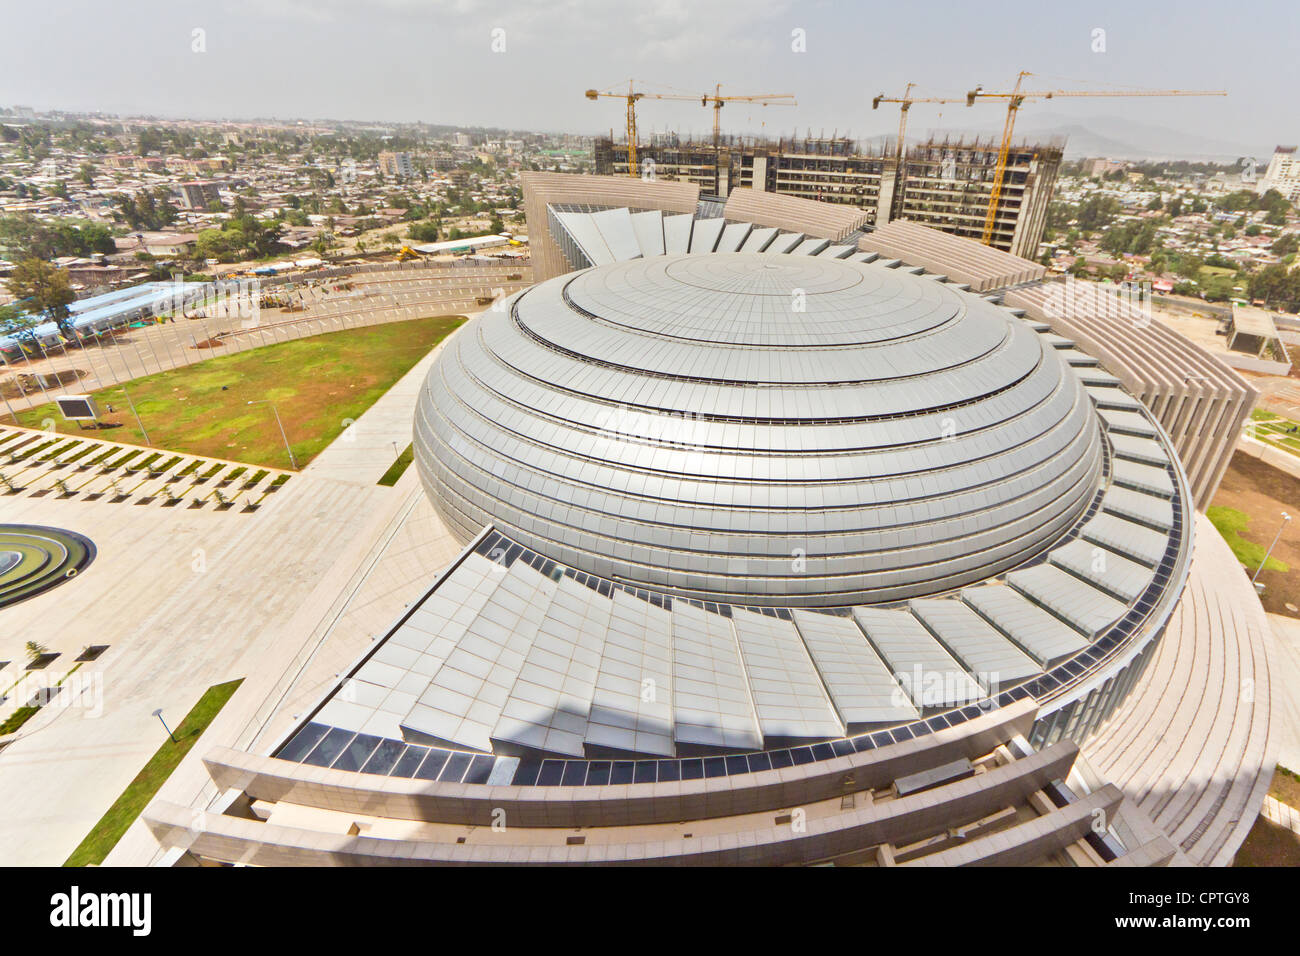 A view of the roof of the newly constructed African Union Hall in Addis Ababa, Ethiopia Stock Photo